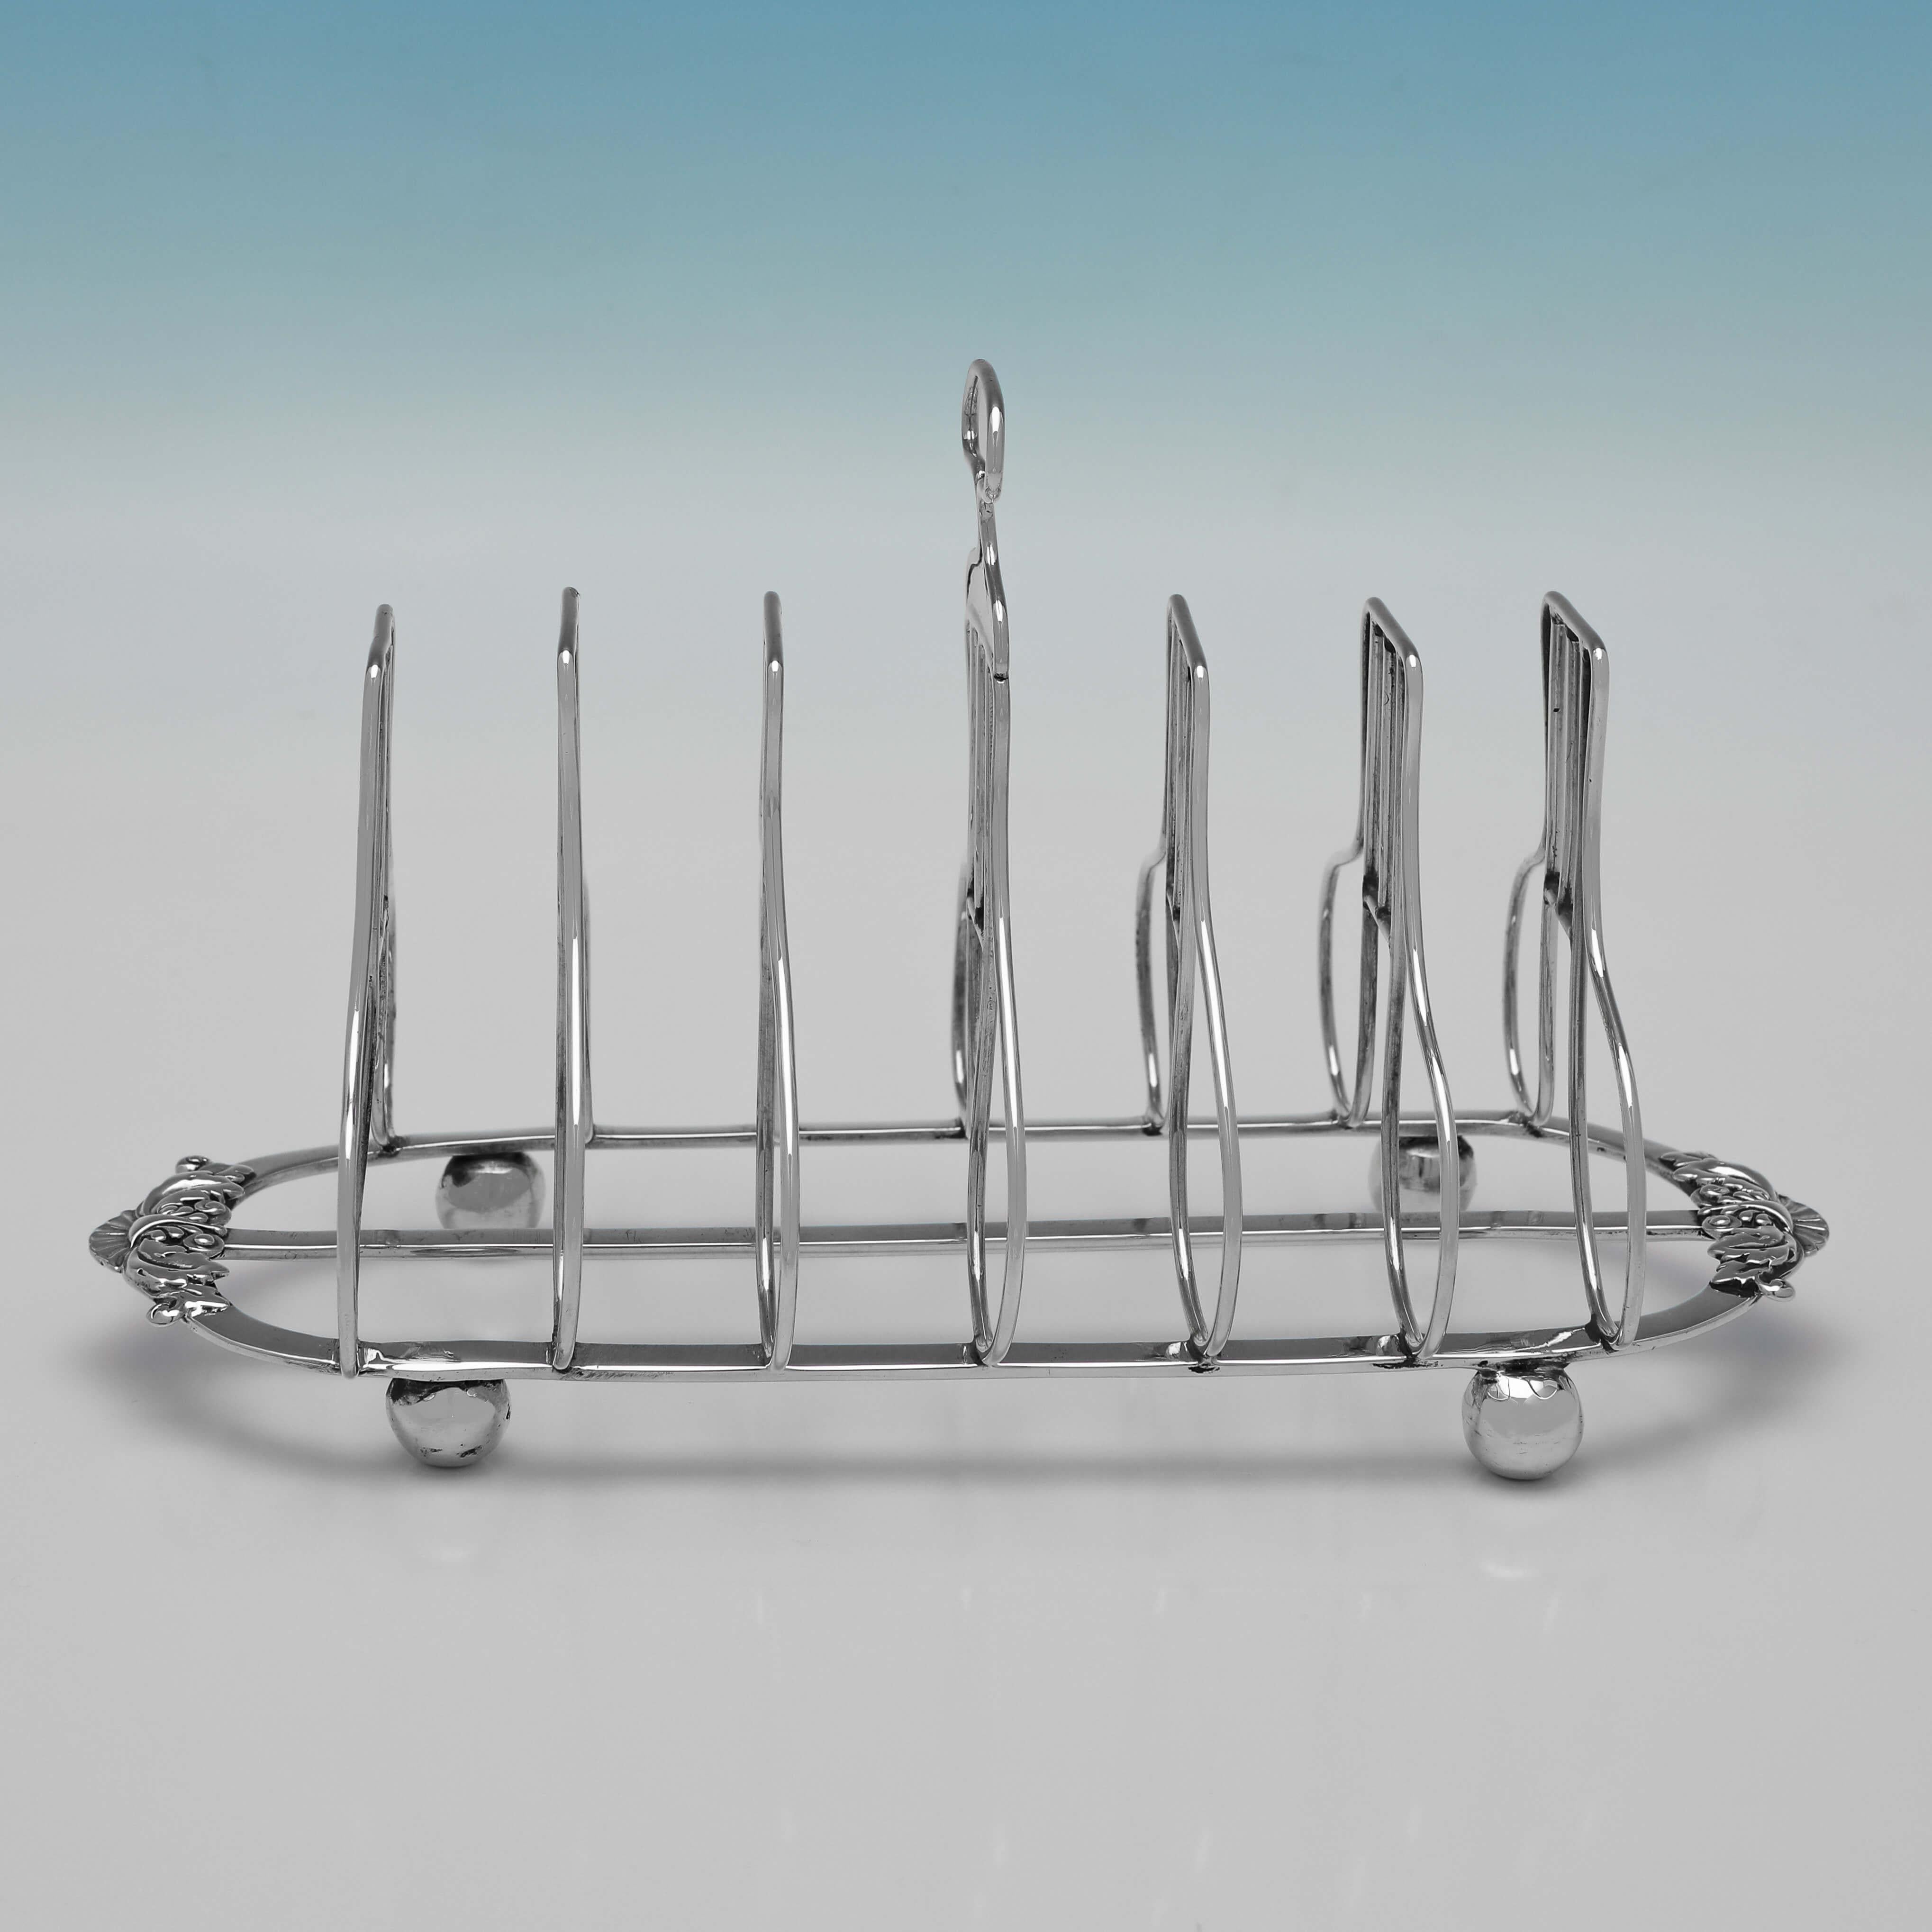 Hallmarked in London in 1815 by Joseph Angell I, this handsome, Regency period, Antique Sterling Silver Toast Rack, stands on 4 ball feet, and will hold 6 pieces of toast. 

The toast rack measures 4.75